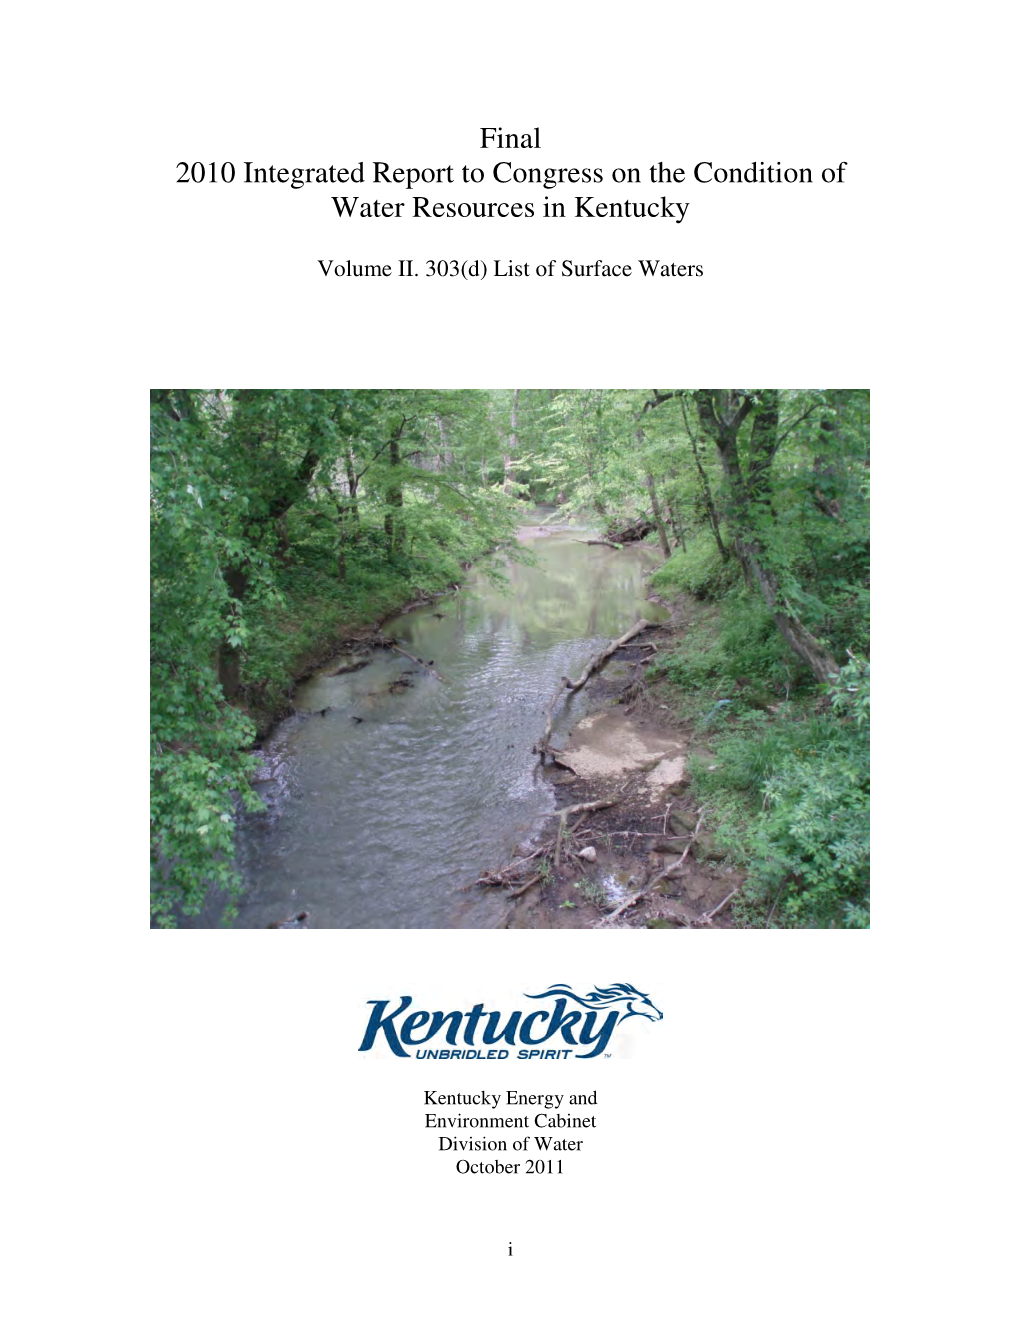 Final 2010 Integrated Report to Congress on the Condition of Water Resources in Kentucky